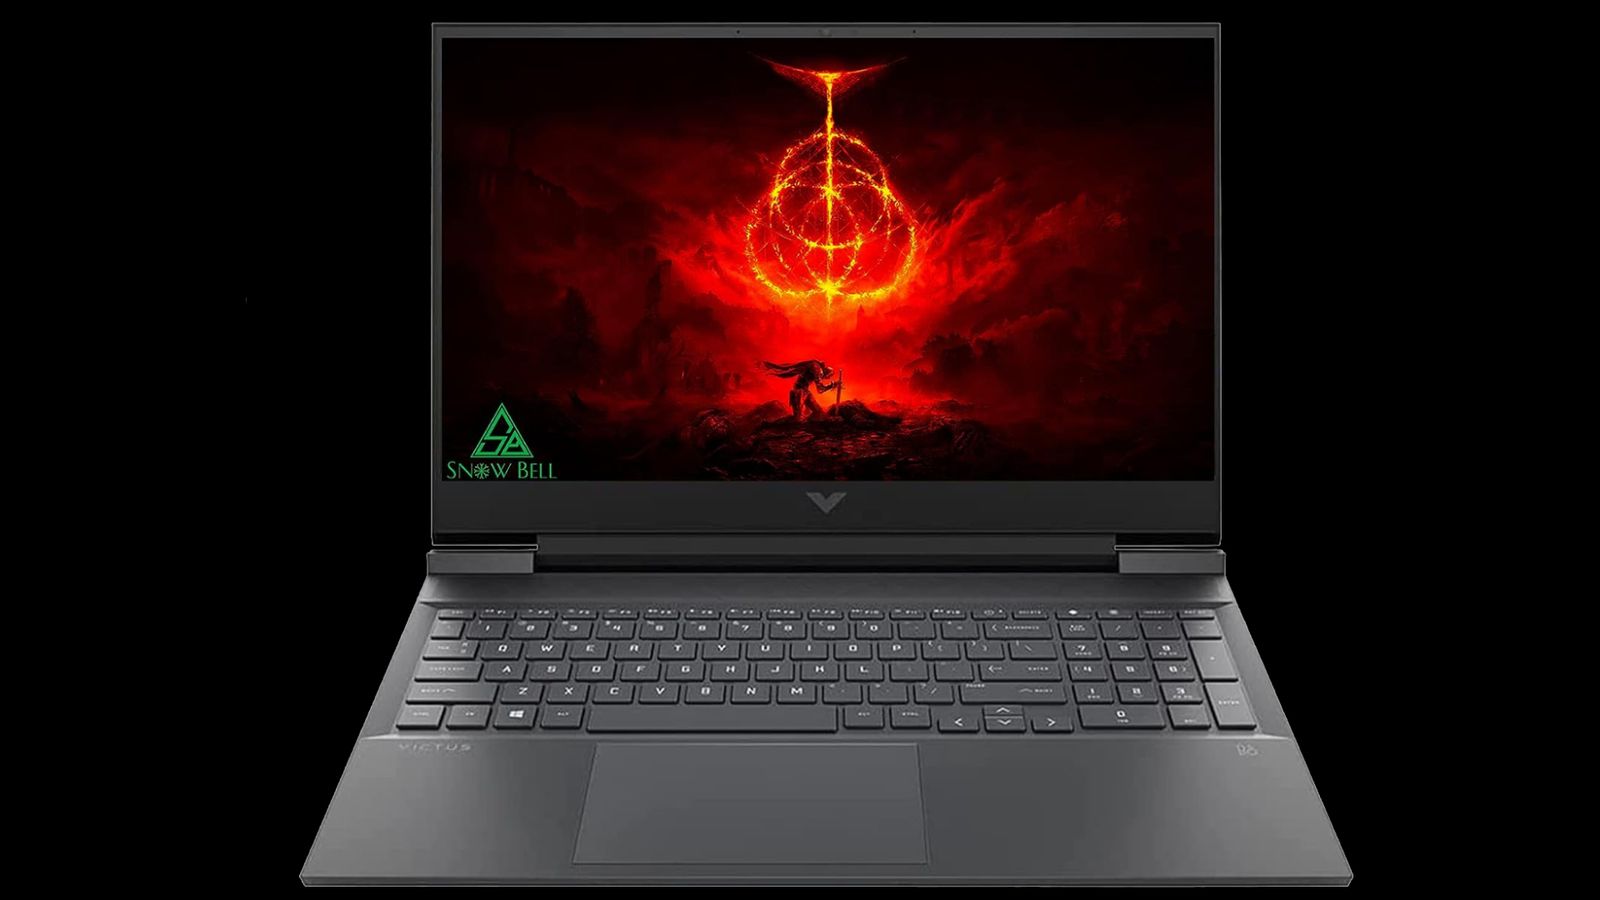 HP Victus 16 product image of a black laptop featuring a fantasy character pulling a weapon out of a stone in front of a red symbol on the display.